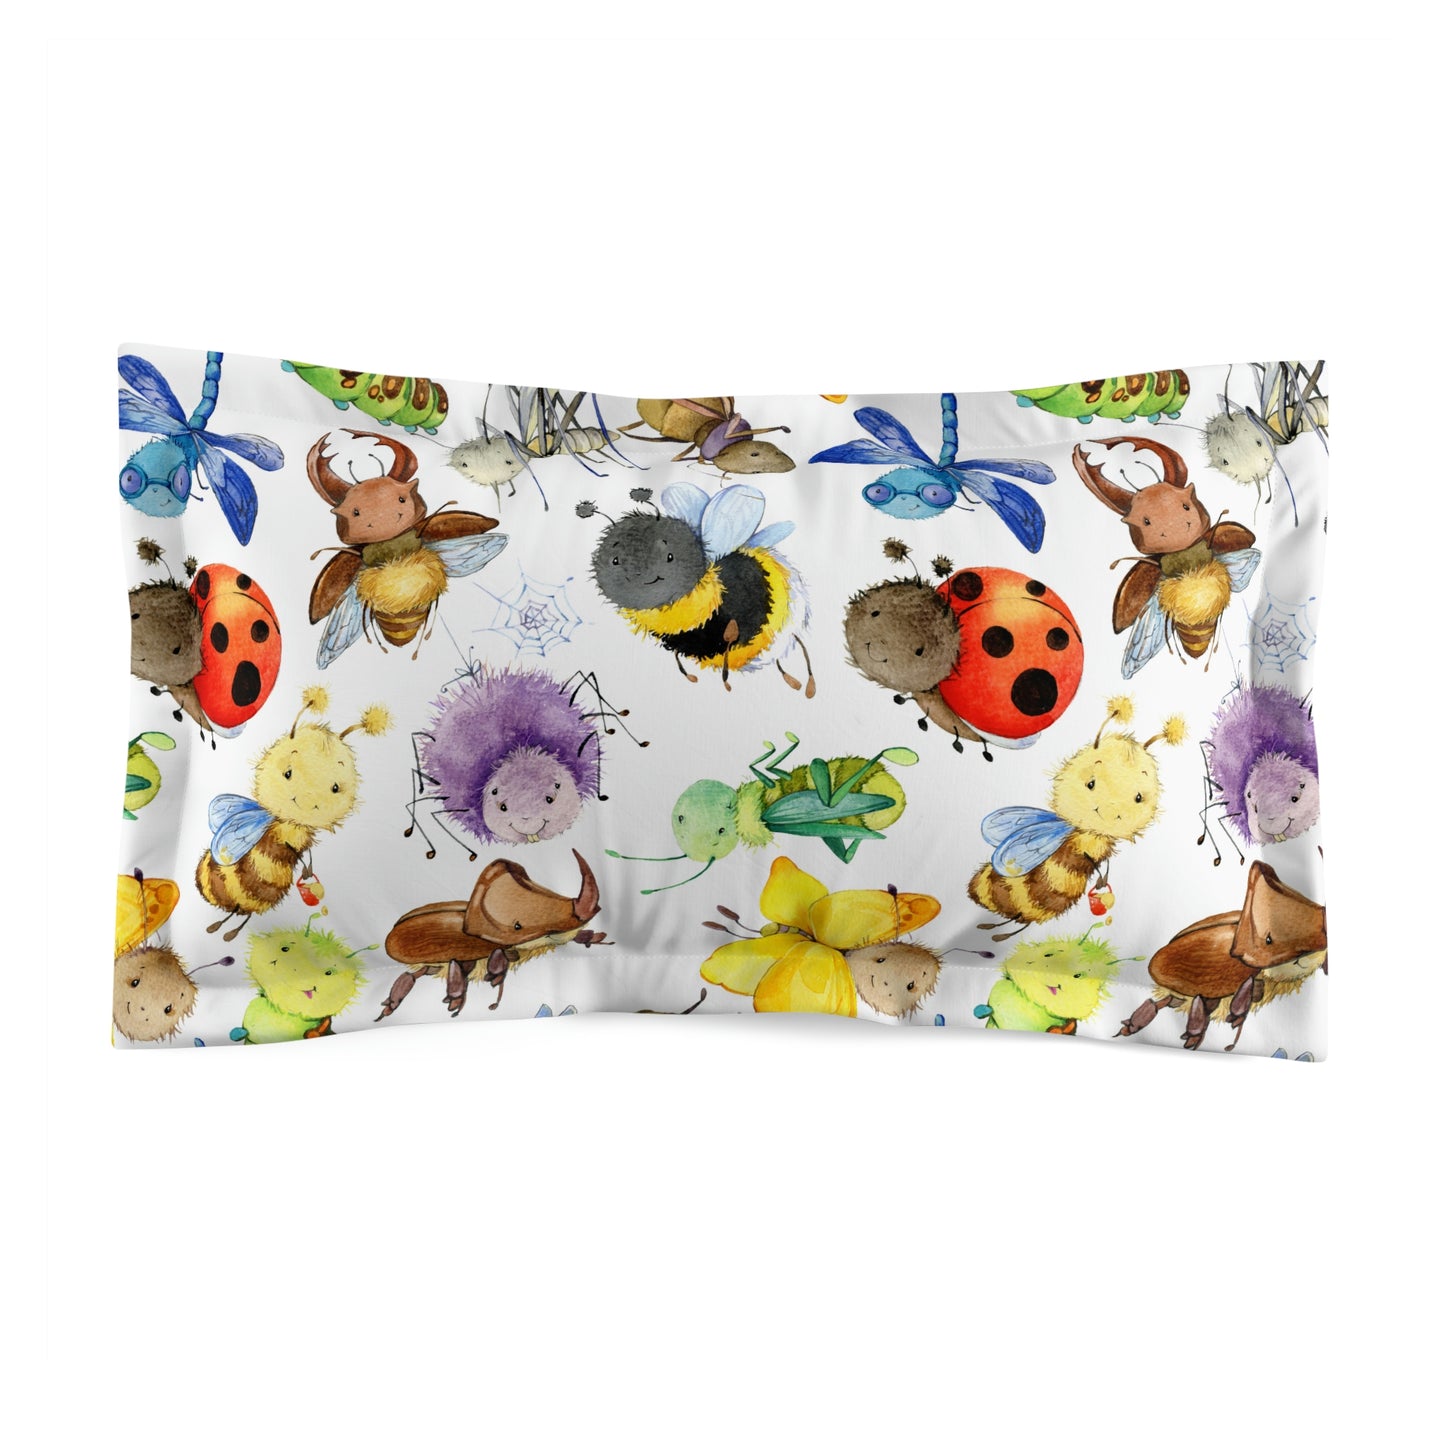 Ladybugs, Bees and Dragonflies Microfiber Pillow Sham